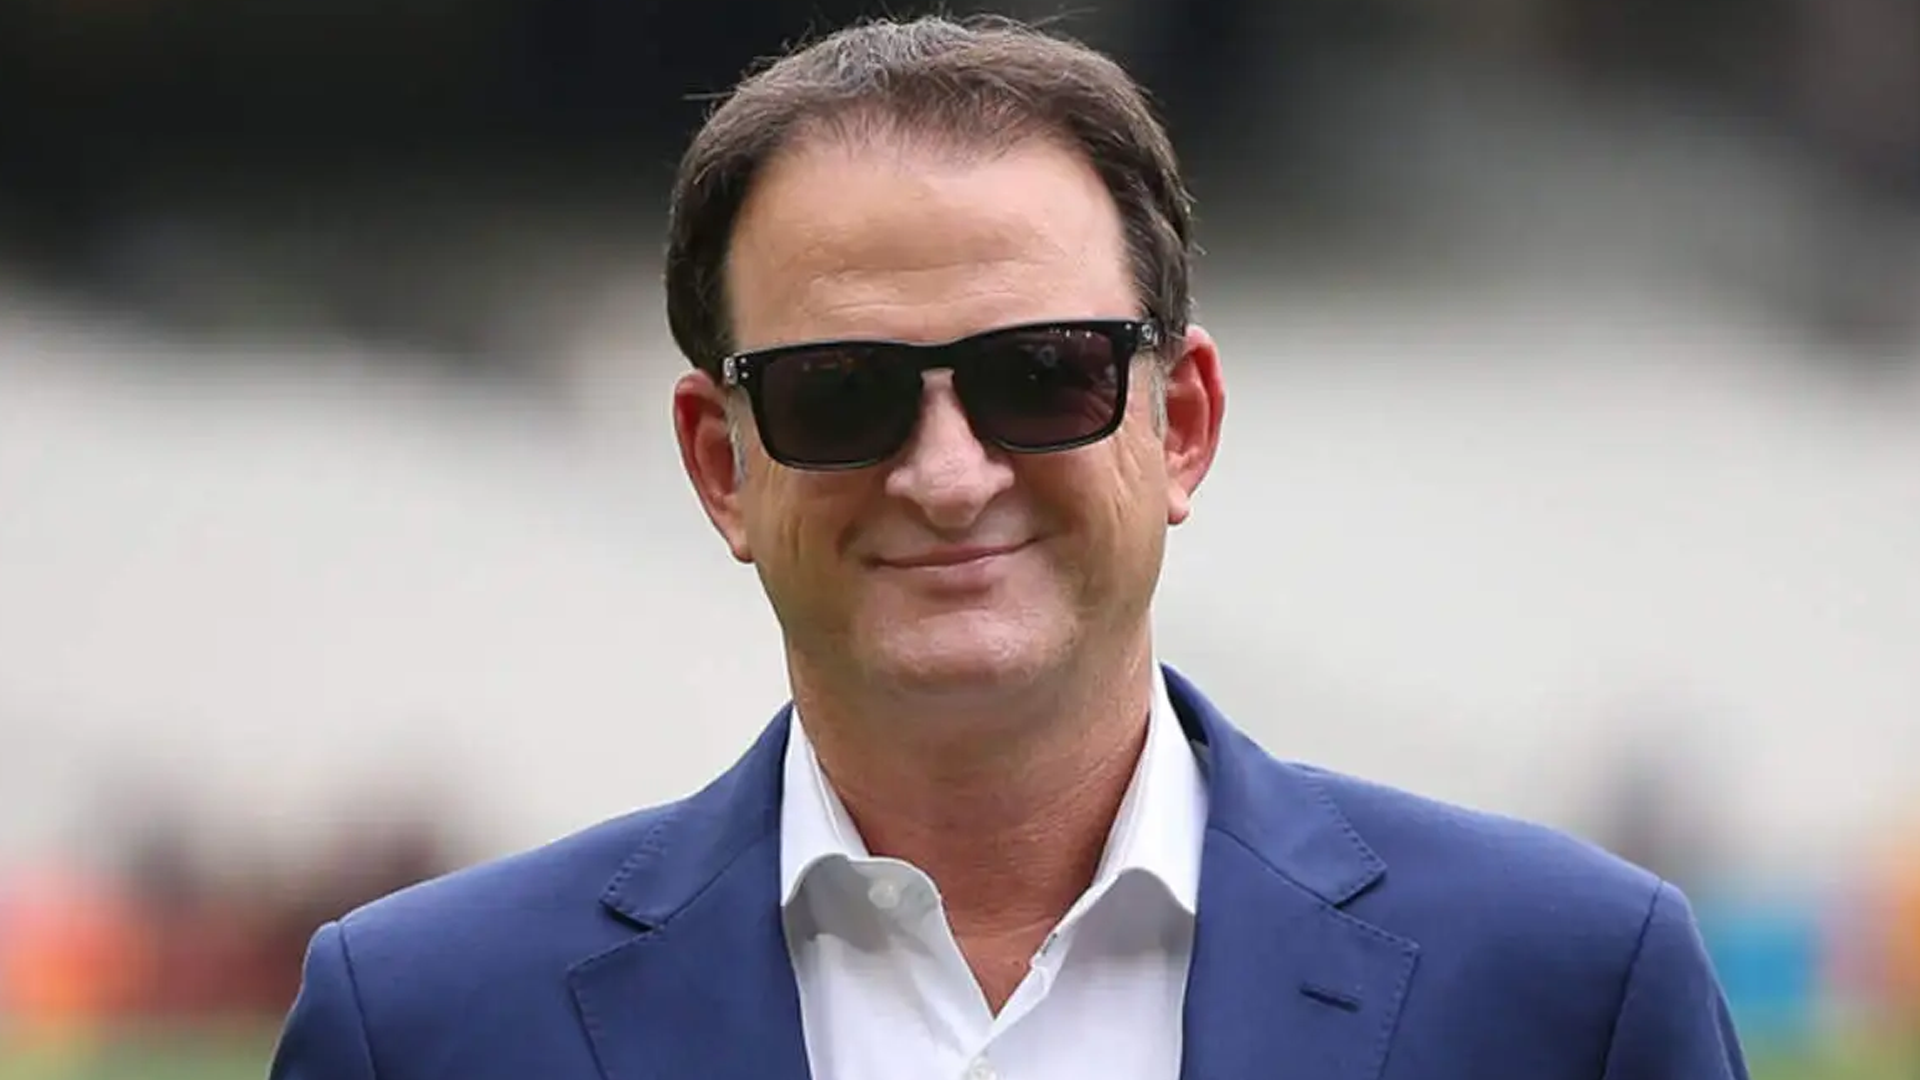 Mark Waugh Names The 'Key Player' Of Australia For 2023 ODI World Cup